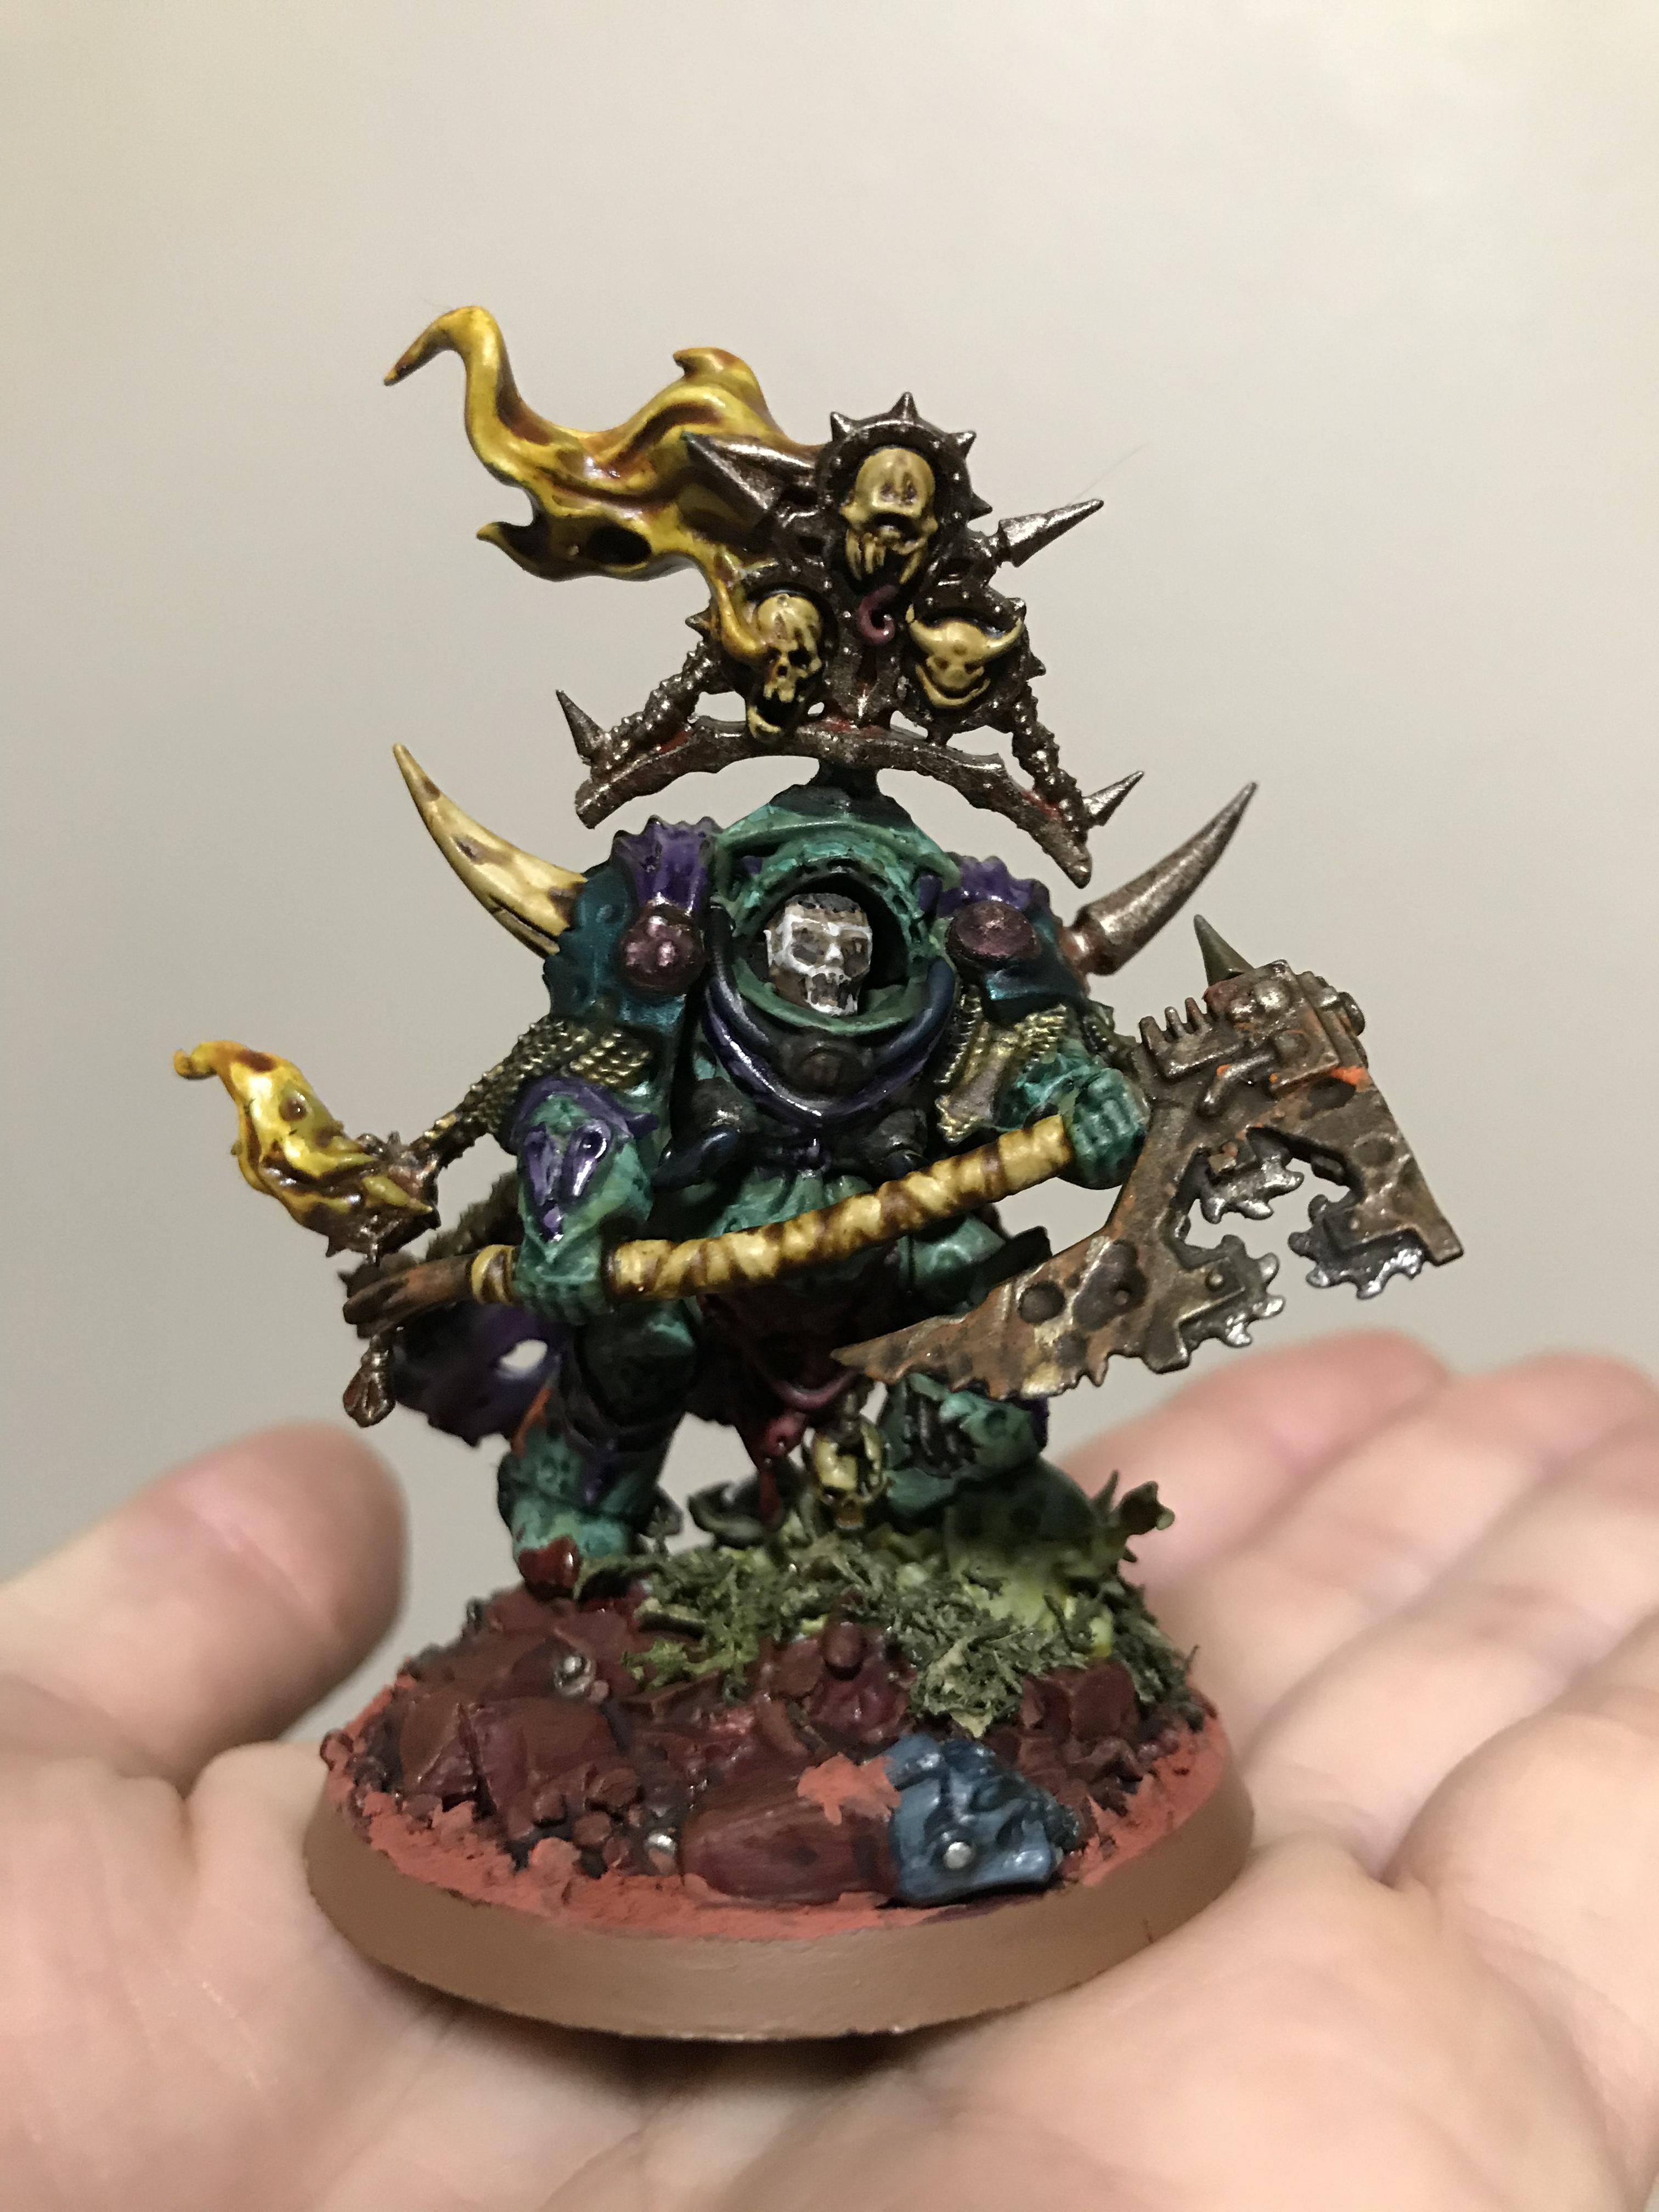 Chaos, Chaos Space Marines, Contrast Paint, Conversion, Cthulhu, Death Guard, Evil, Green, Nurgle, Putrid, Scratch Build, Warhammer 40,000